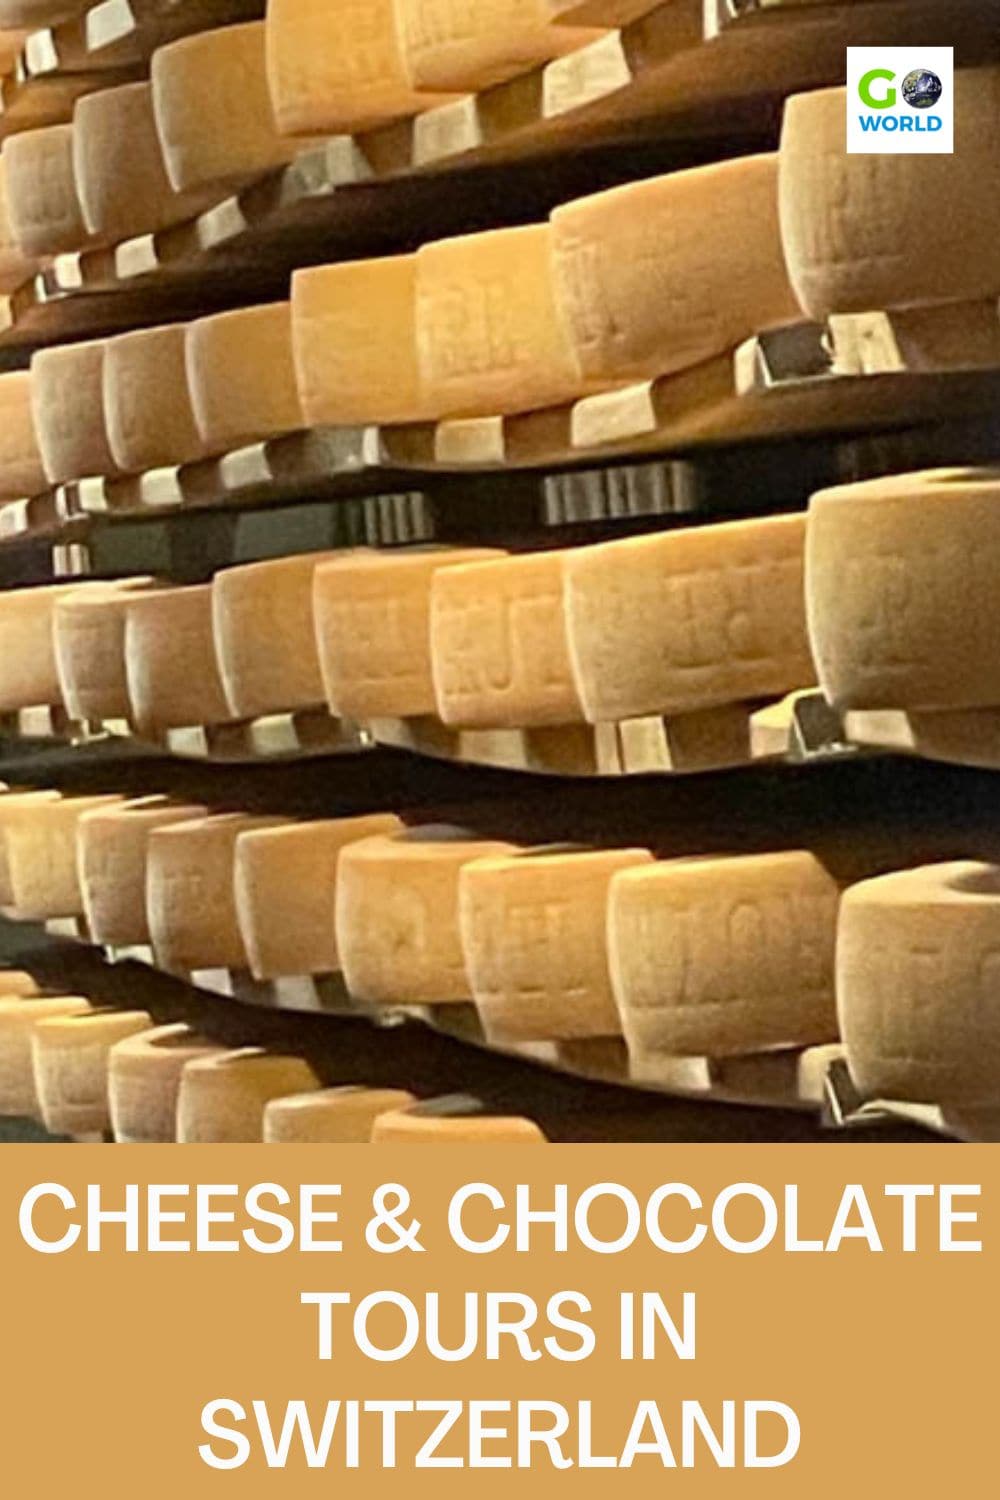 Join the Swiss in their love for delectable delights with a cheese factory tour and a journey aboard the chocolate train in Switzerland. #switzerland #swisscheese #chocolatetrain